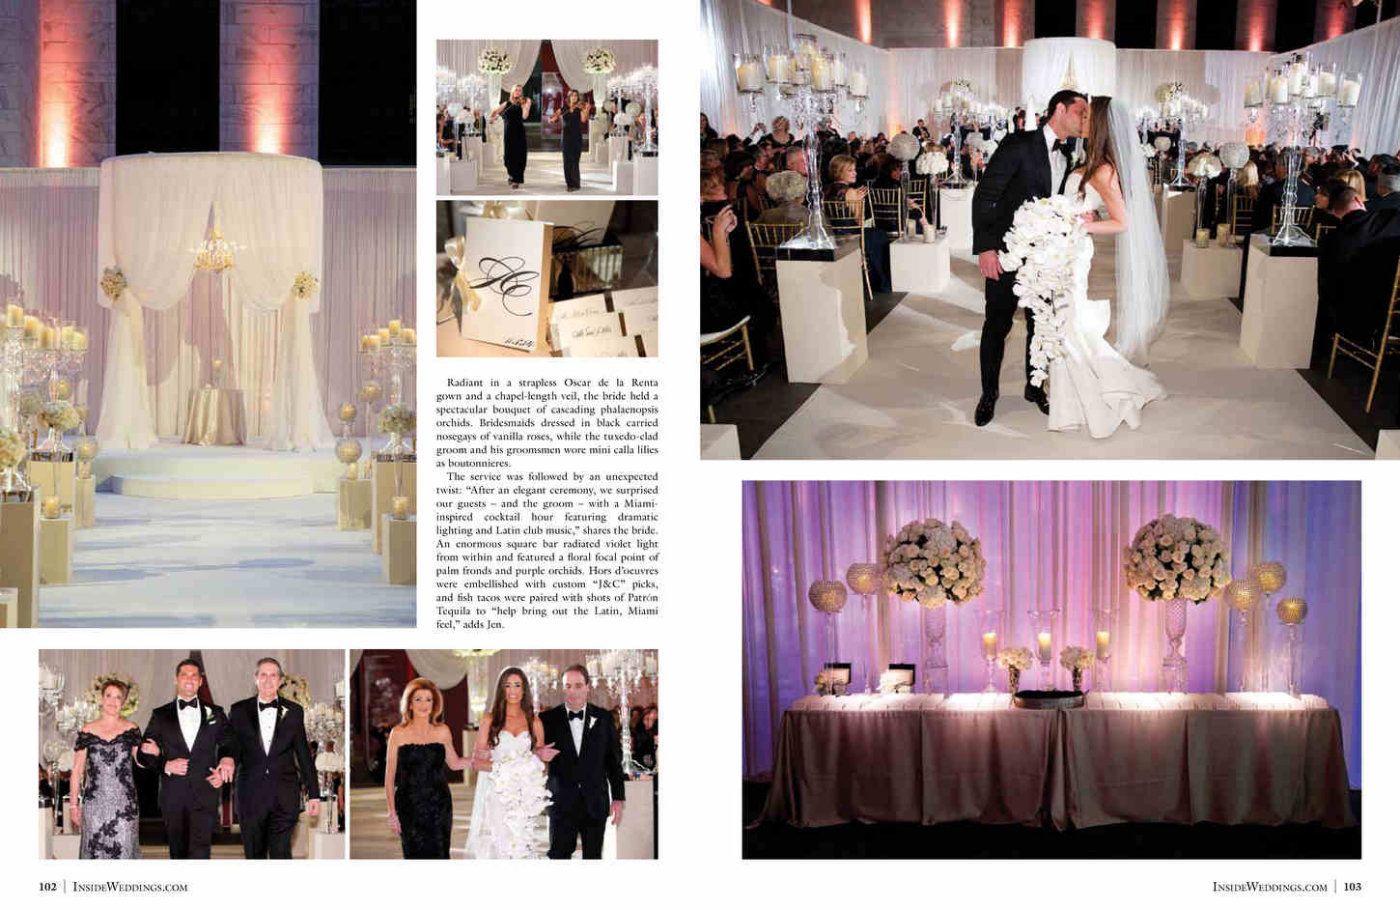 Thank you to the team at Inside Weddings for selecting Jen and Chad's wedding to feature in the Fall 2015 edition. We're always so grateful to the Publishers Walt and Art, and Editor, Nicole. Thank you Reva Nathan & Associates who planned this wedding and HMR Designs who brought it all together at The Cleveland Museum of Art in Ohio. Chad proposed to Jen on his Bravo TV Show Million Dollar Listing Miami, he's not shy at all. Click here for a list of vendors.